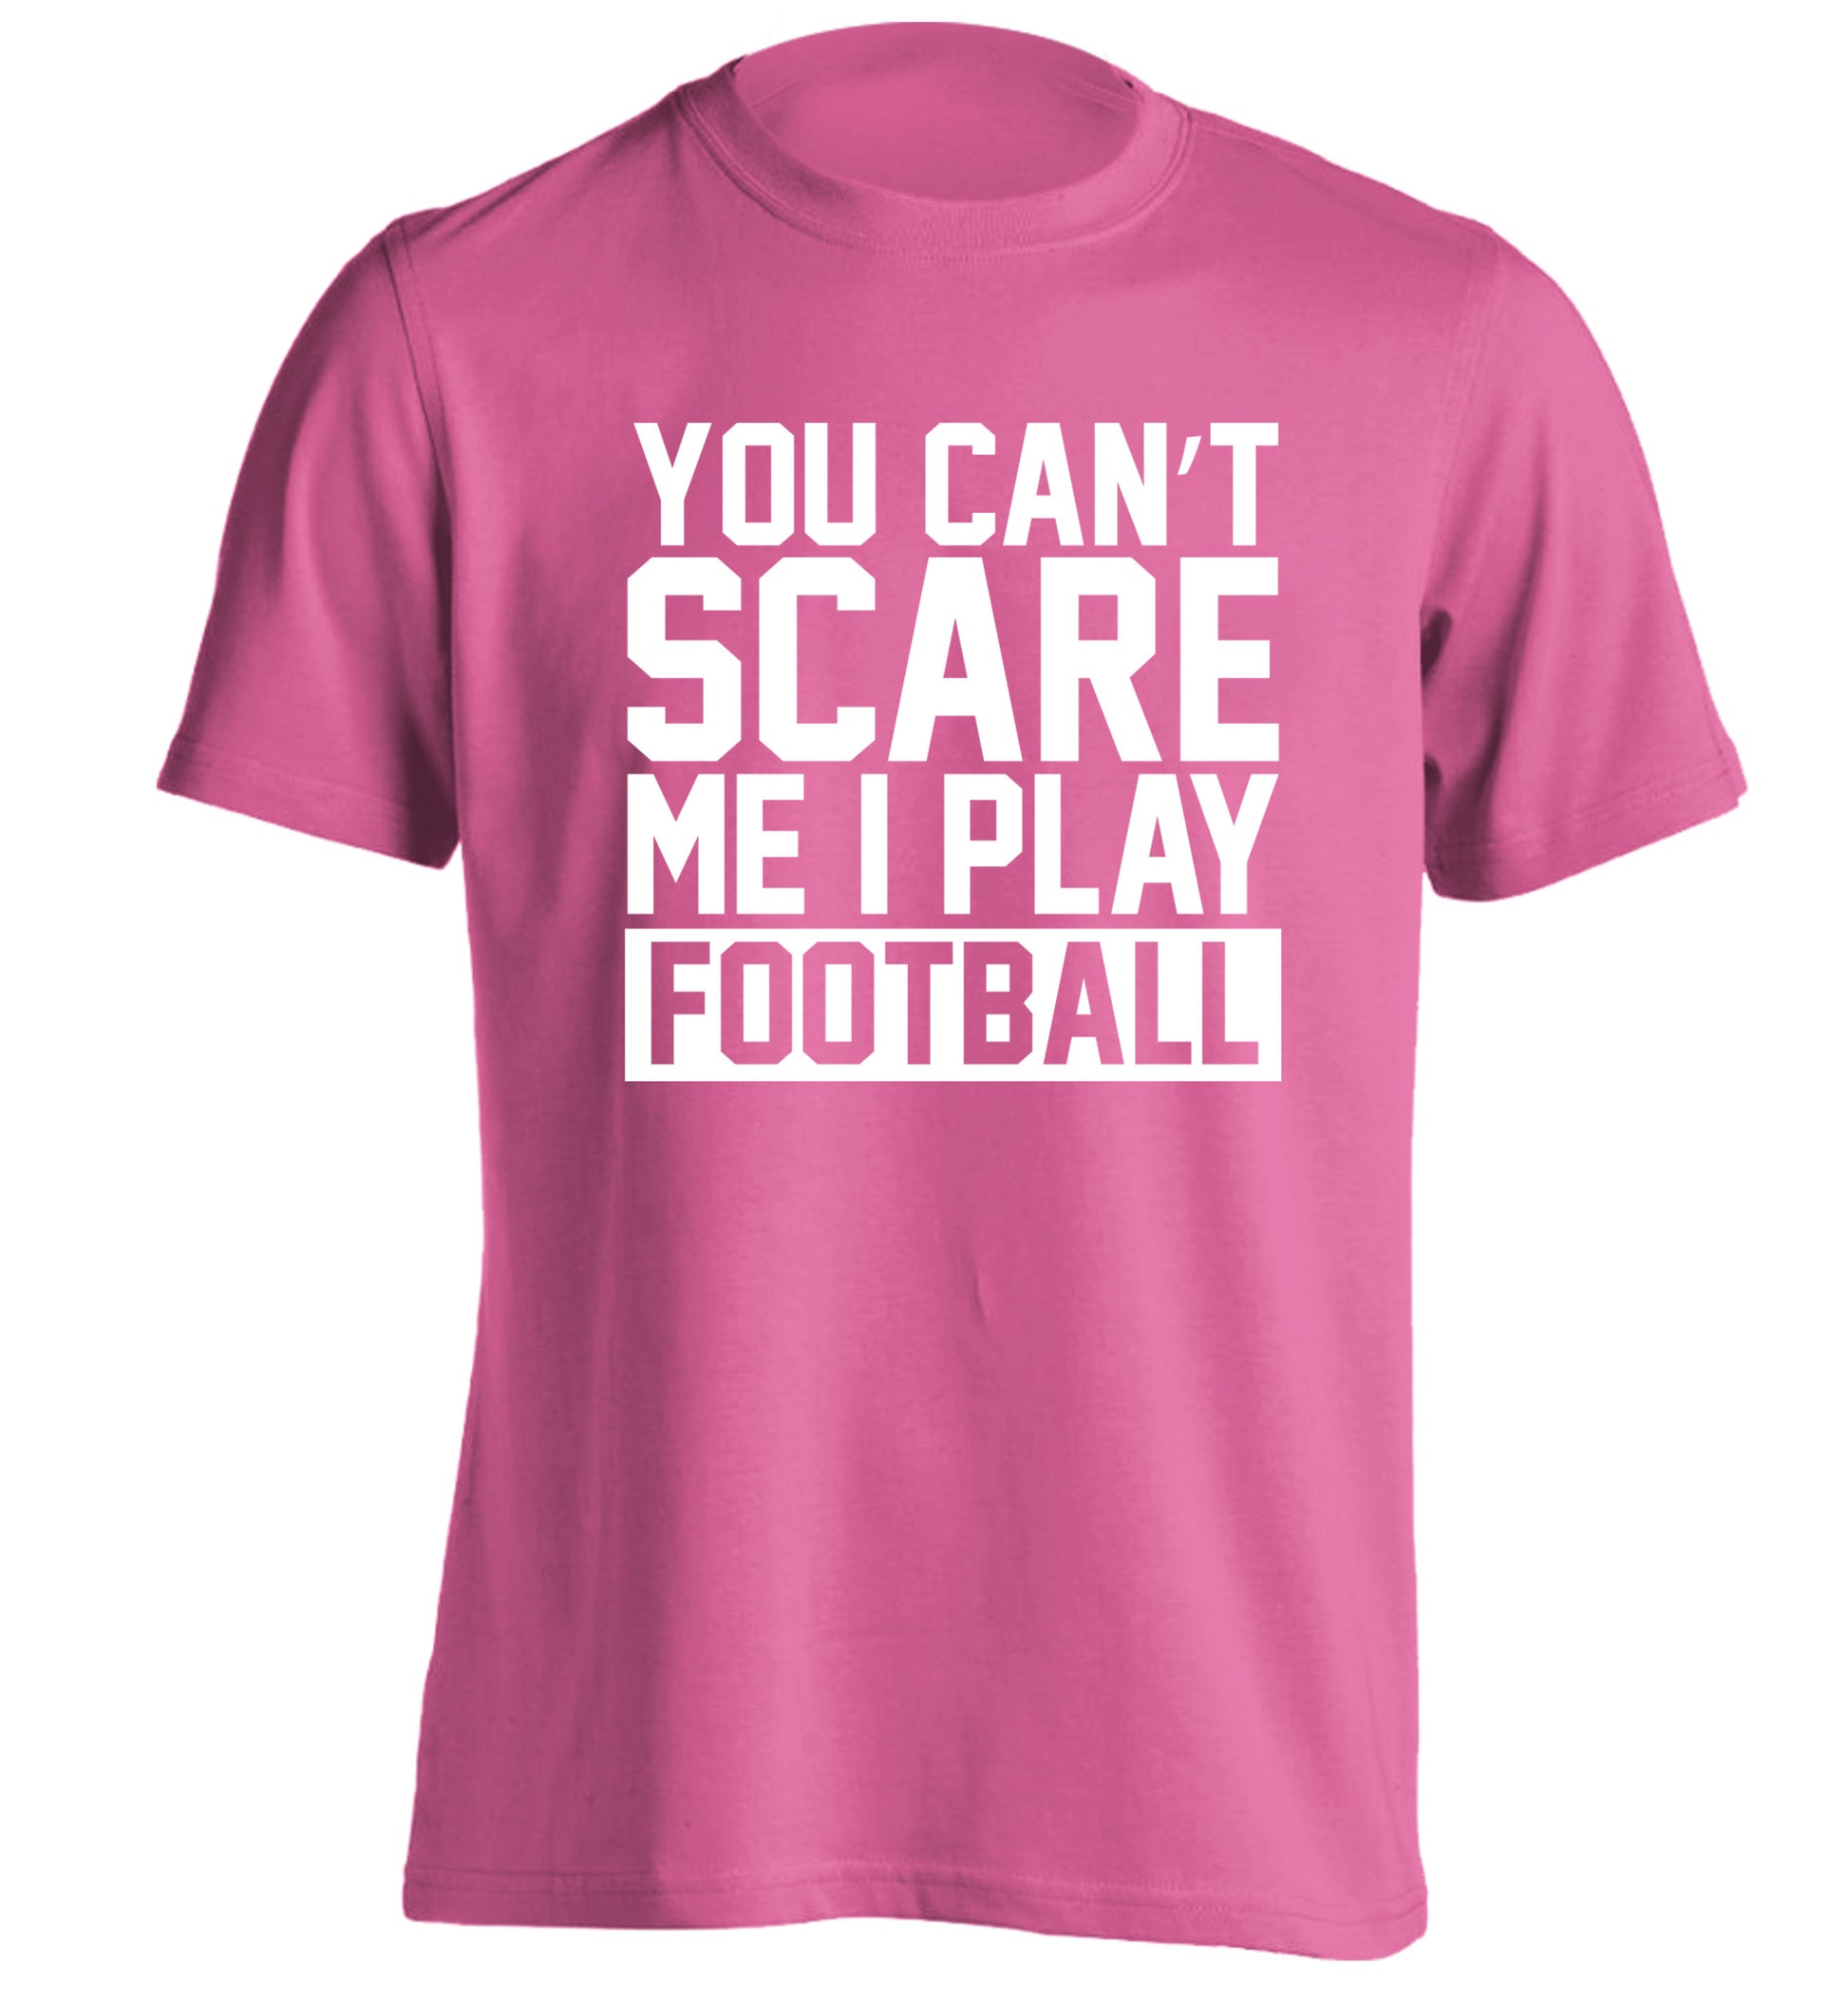 You can't scare me I play football adults unisex pink Tshirt 2XL